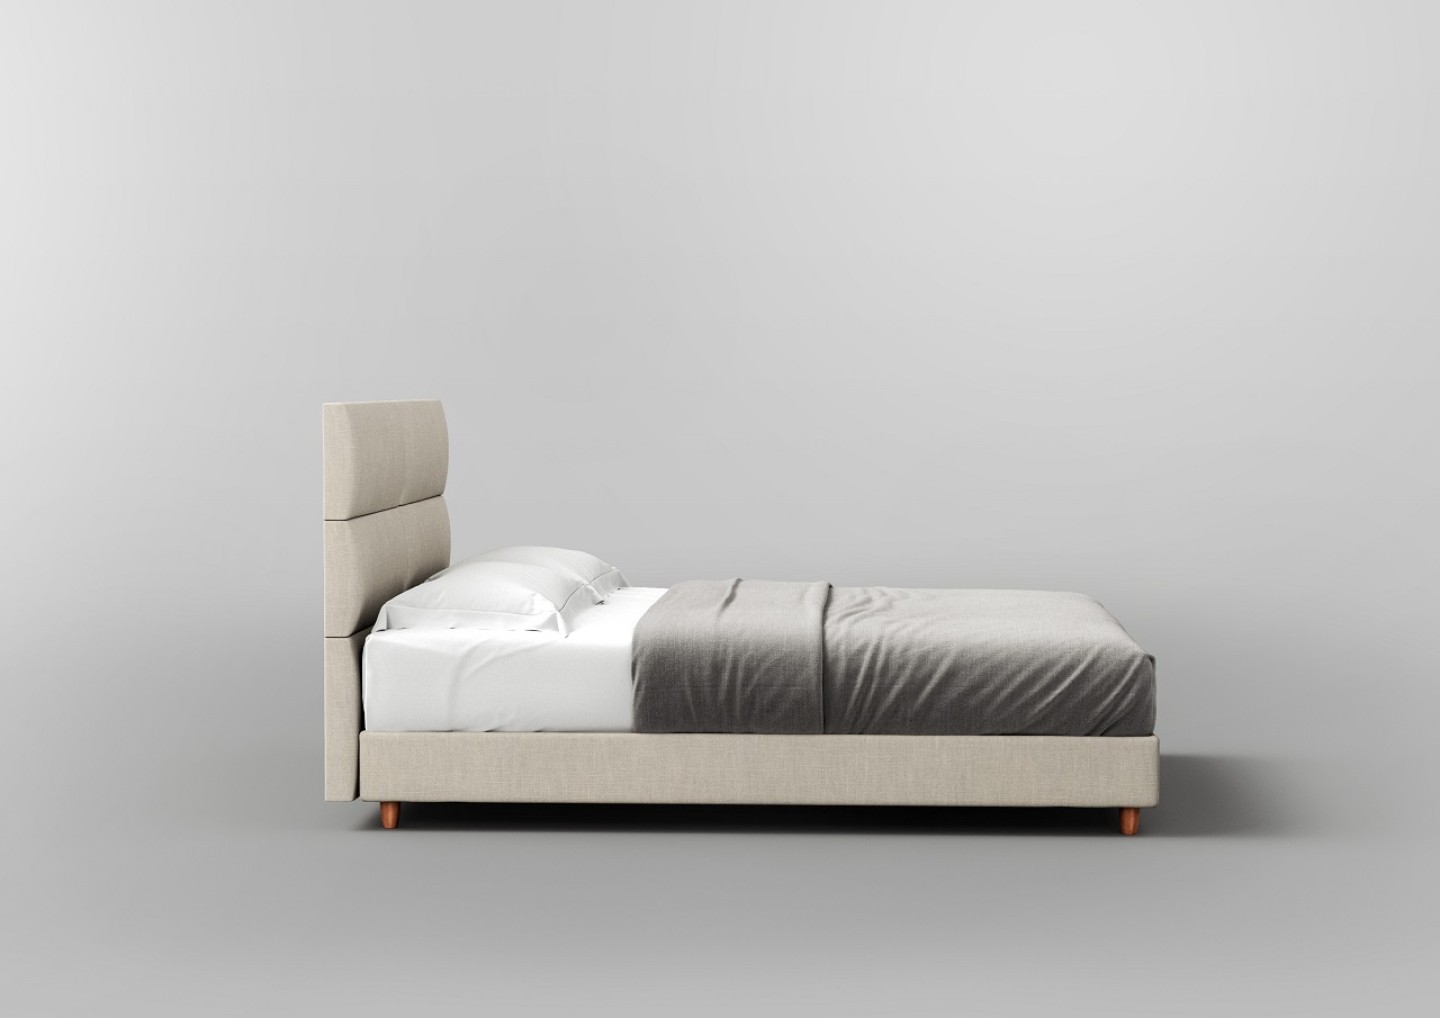 THE CALM BED by Elite Strom